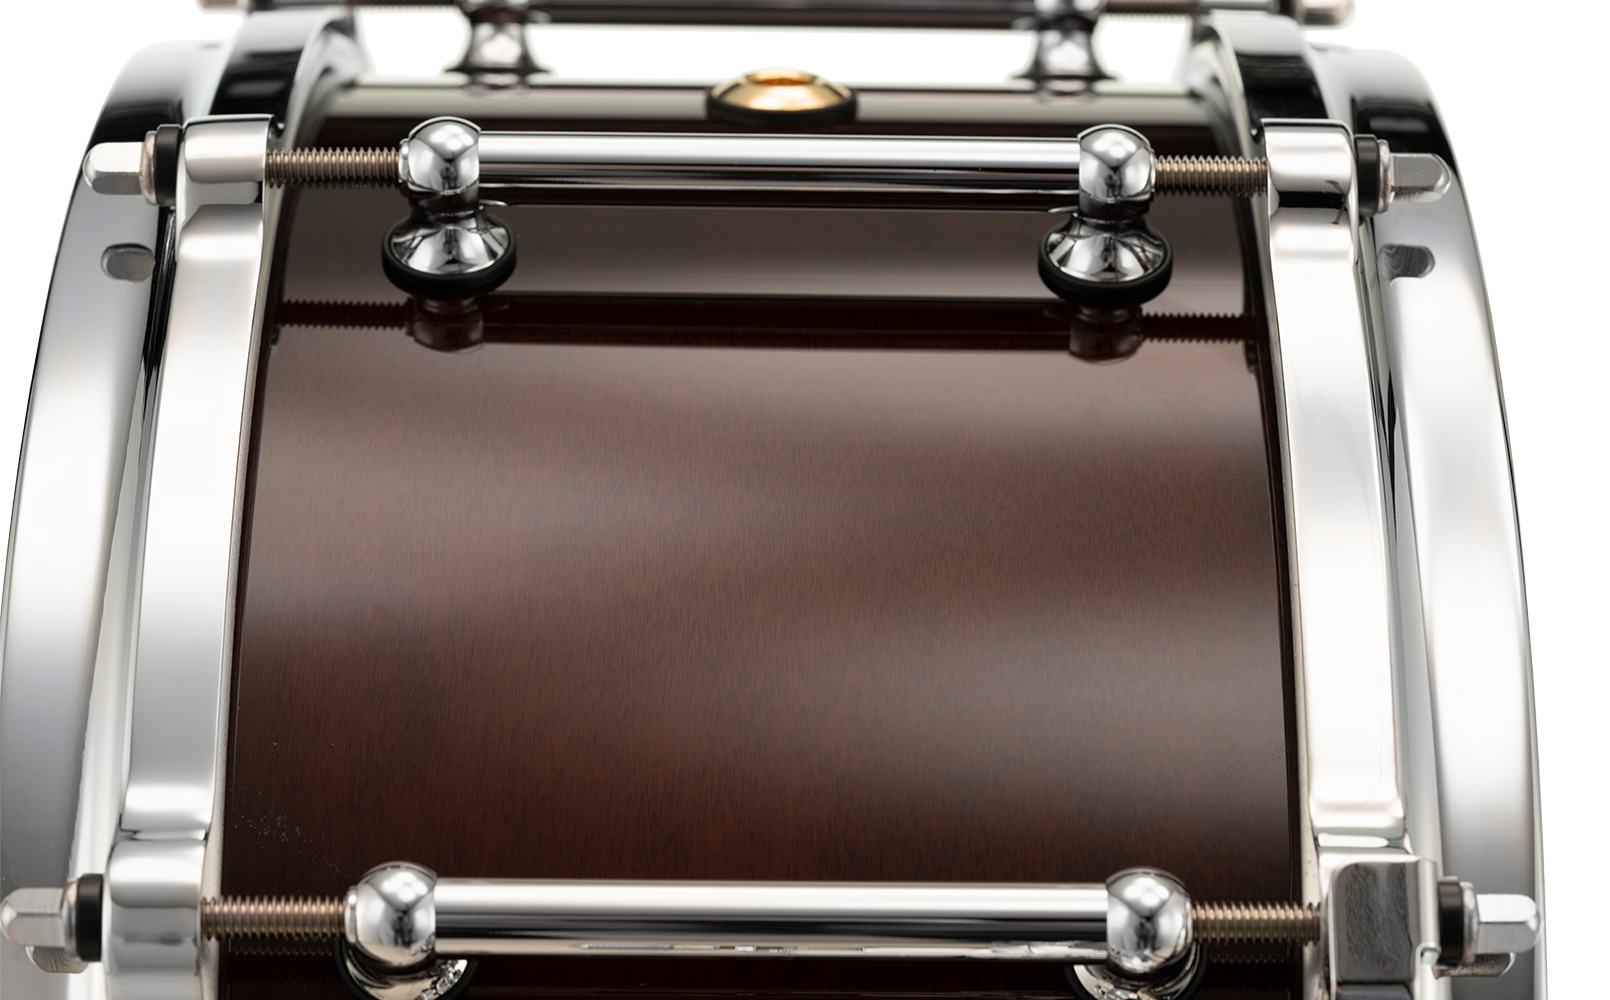 805-500_PHM1465-Philharmonic-Series-1-ply-Solid-Maple-Snare-Drum-204-High-Gloss-Walnut-Bordeaux(3).jpg